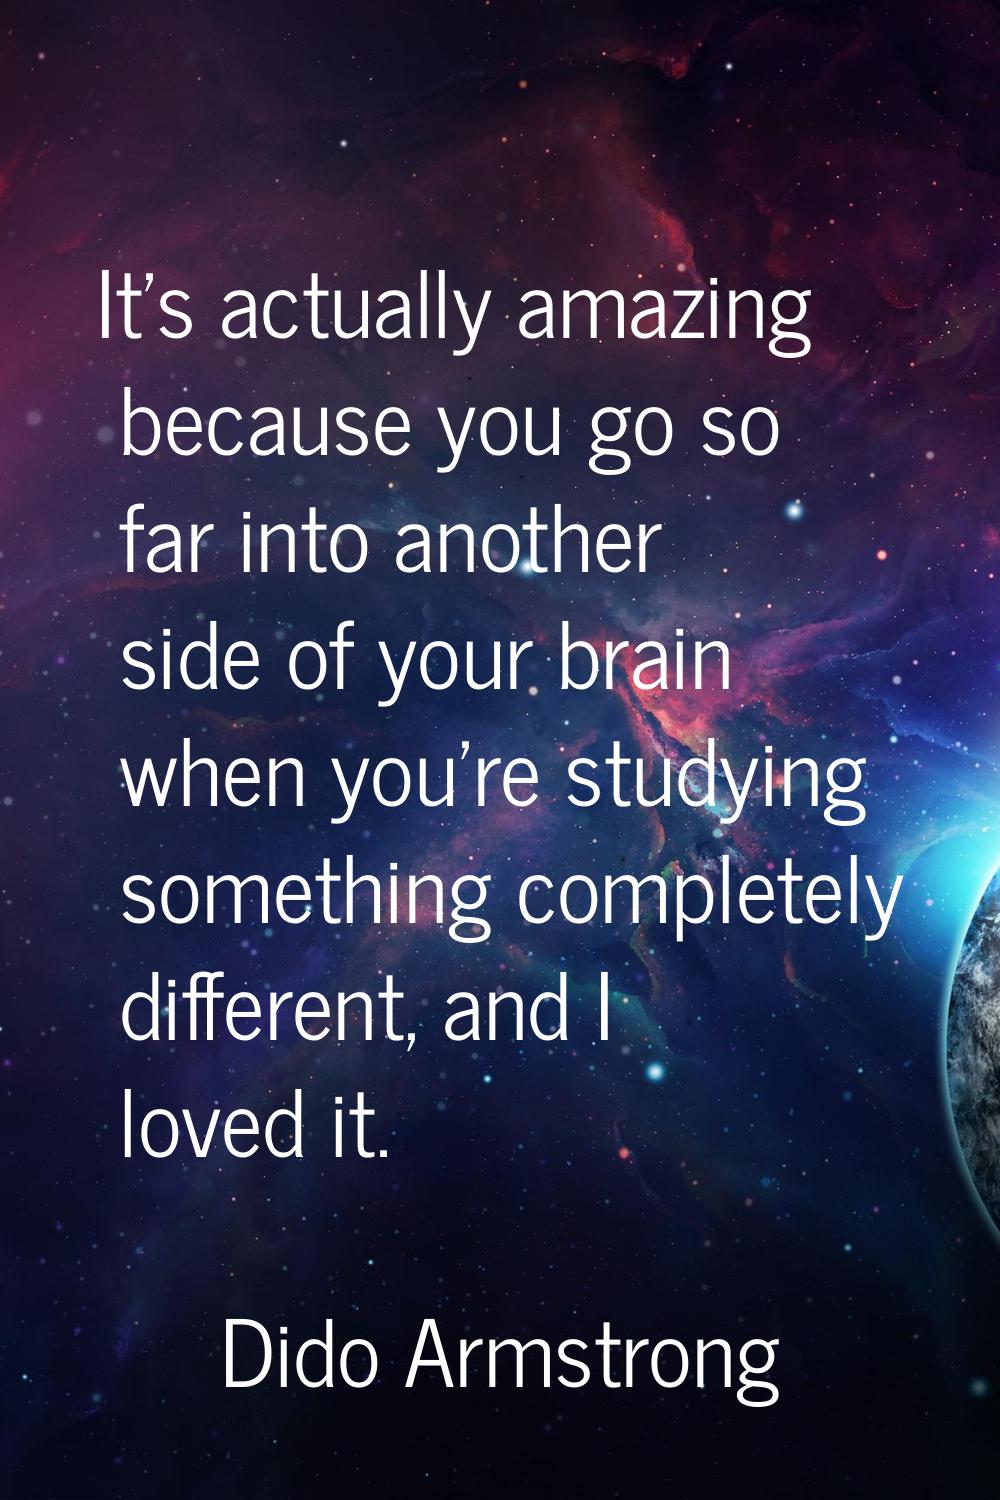 It's actually amazing because you go so far into another side of your brain when you're studying so